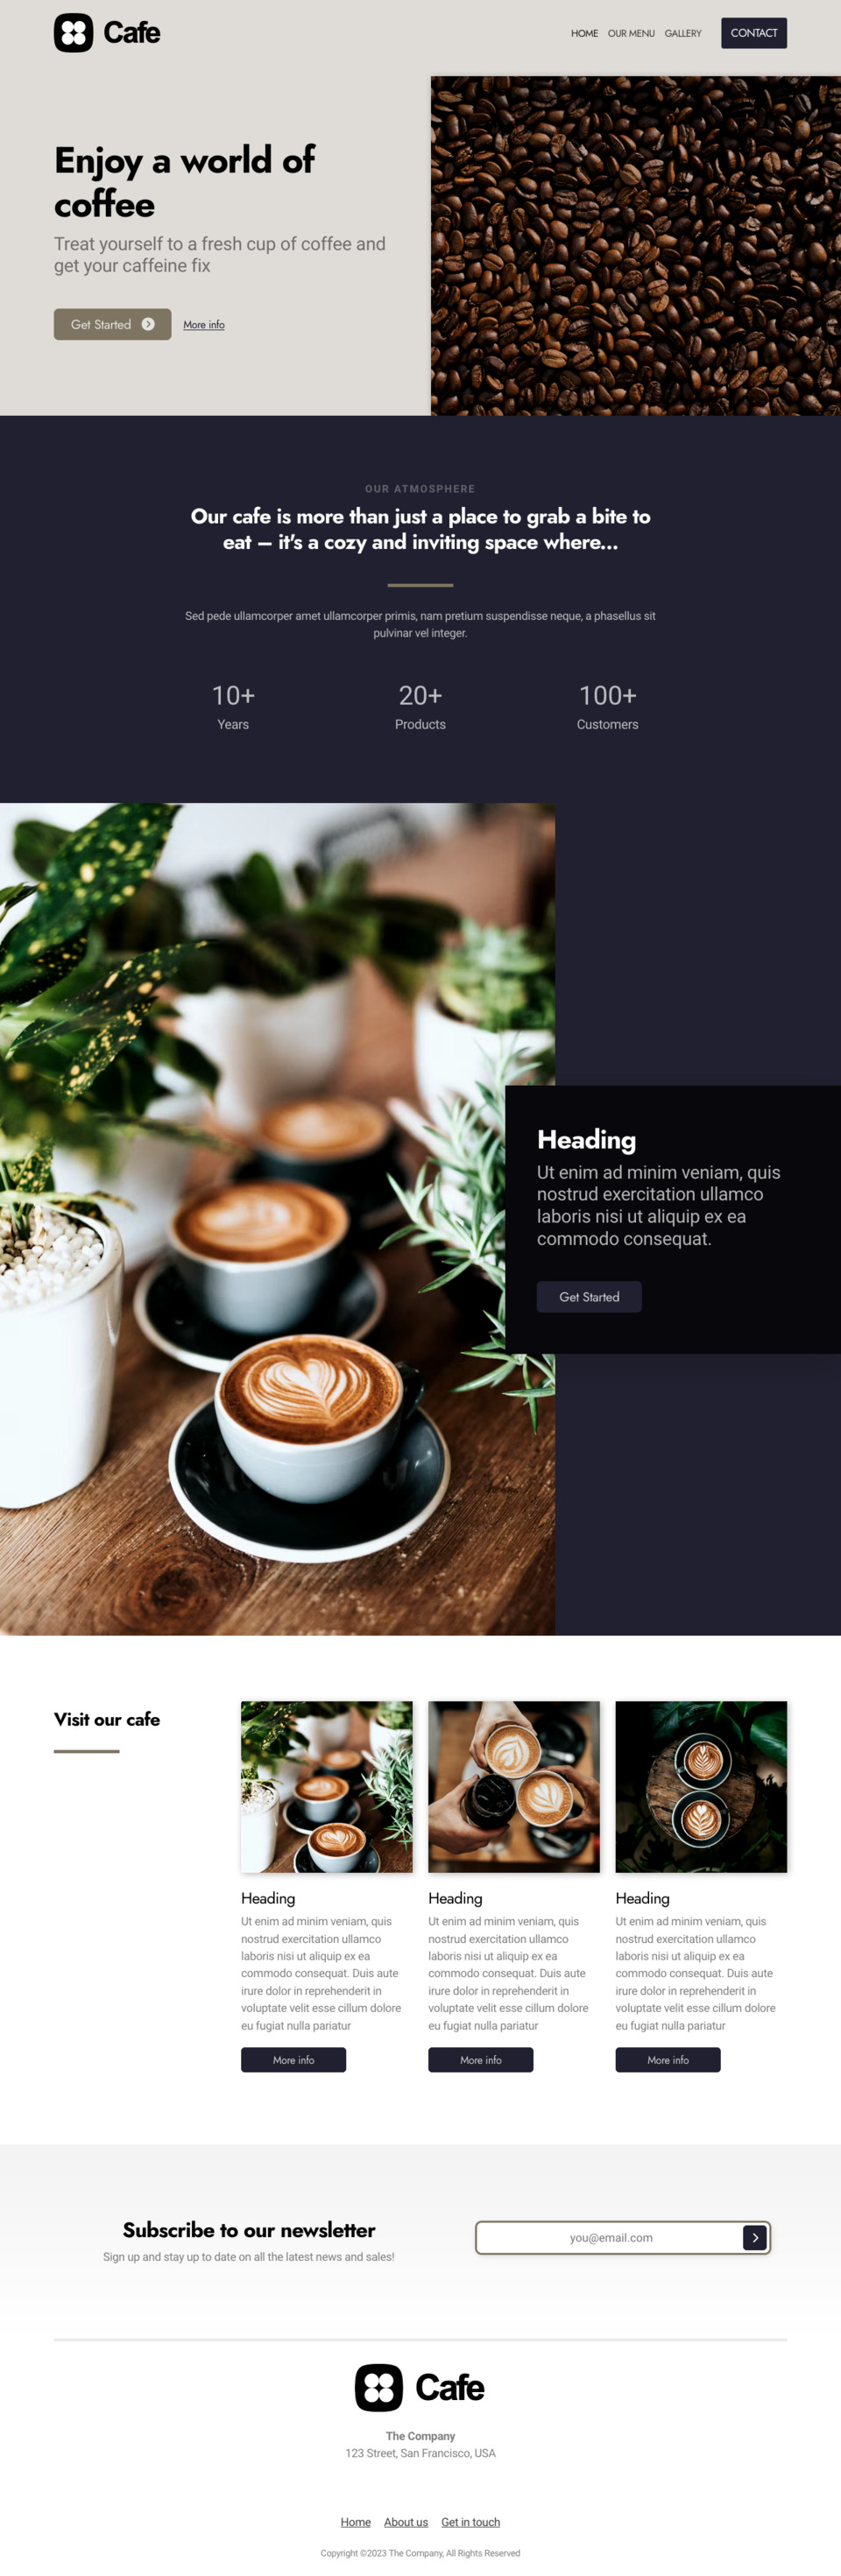 Cafe Website Template - Ideal for cafes, coffee shops, roasteries, and any coffee-related businesses looking to establish an online presence.